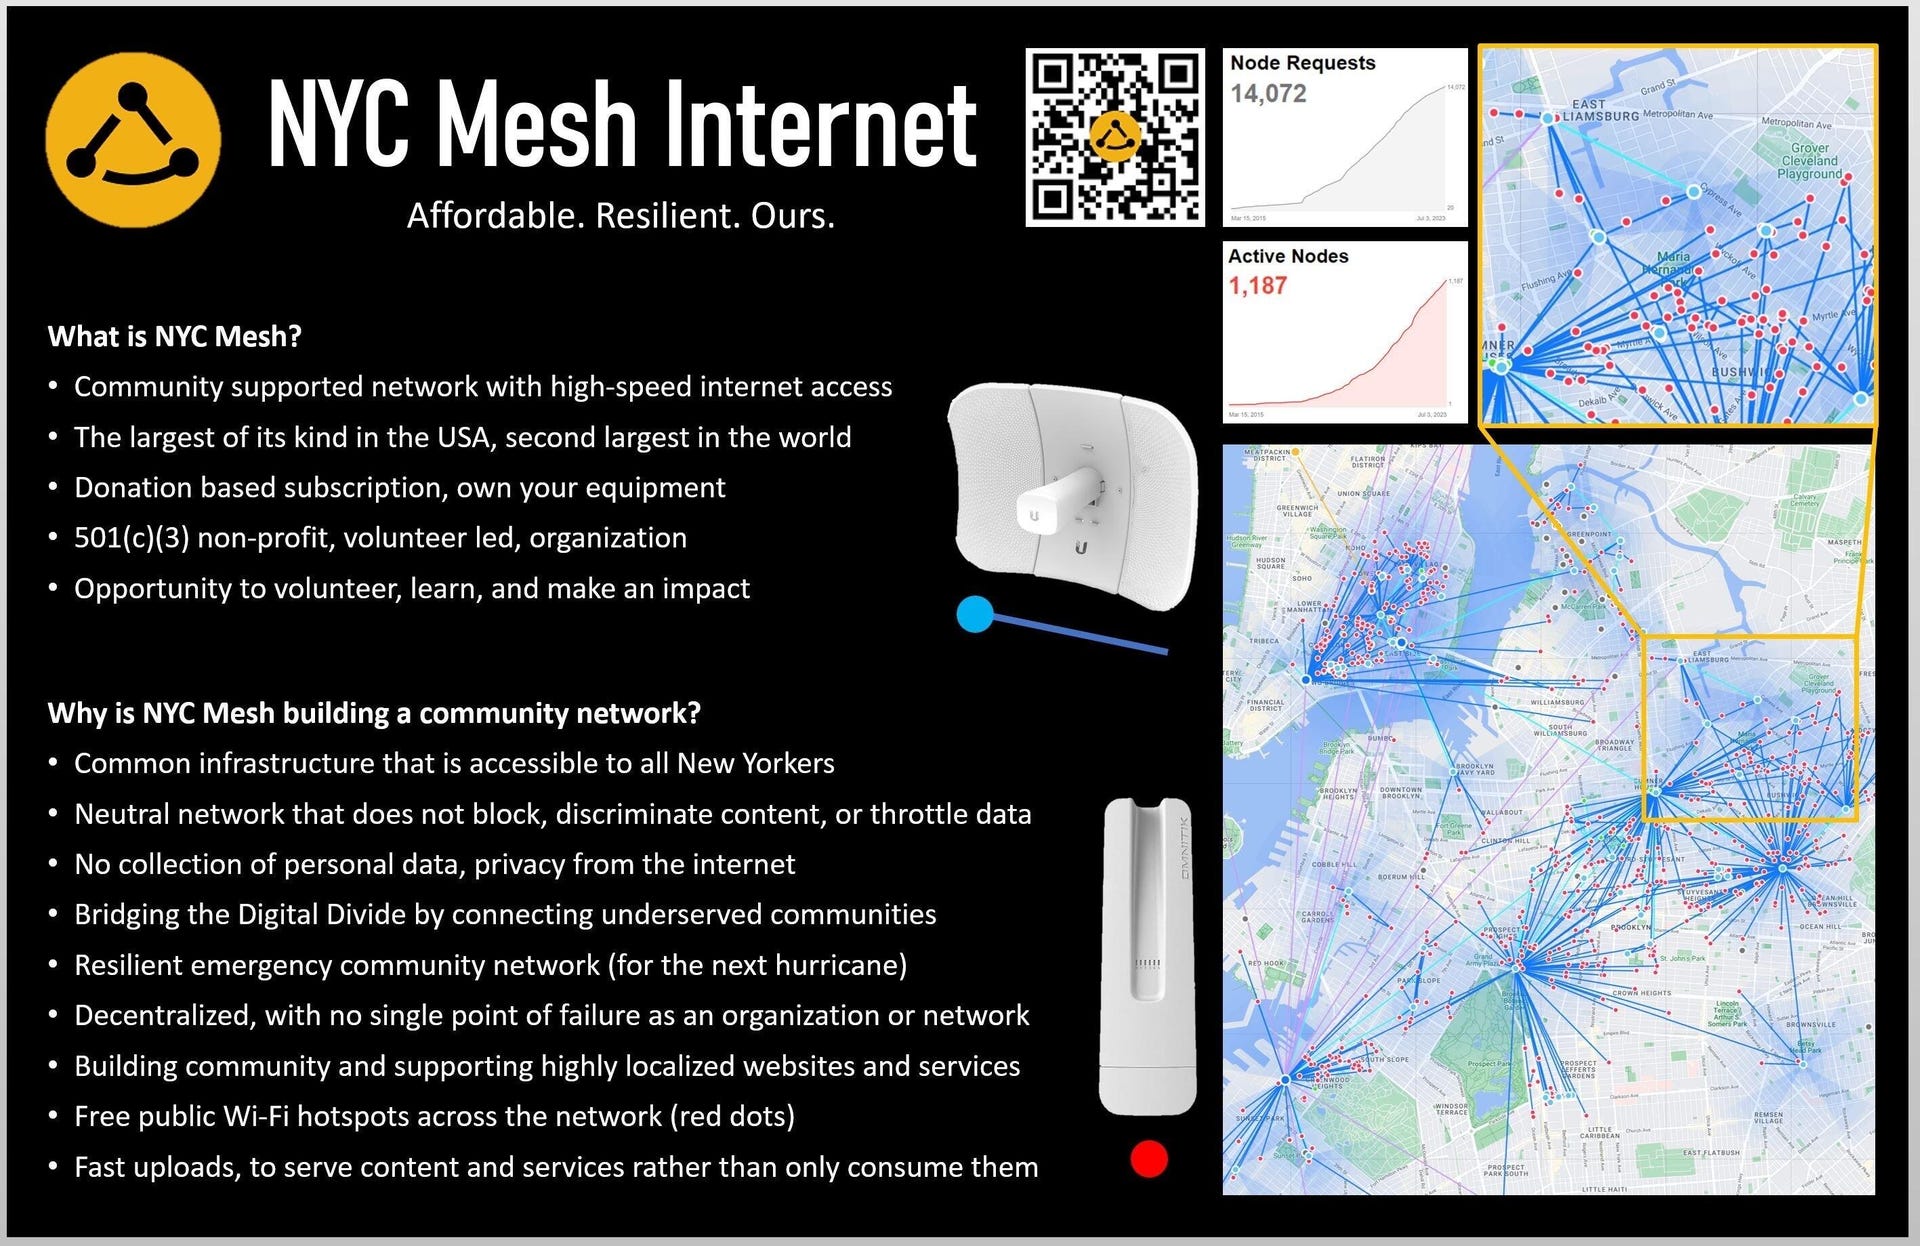 NYC Mesh pamphlet with images of map and equipment and some notes on the service